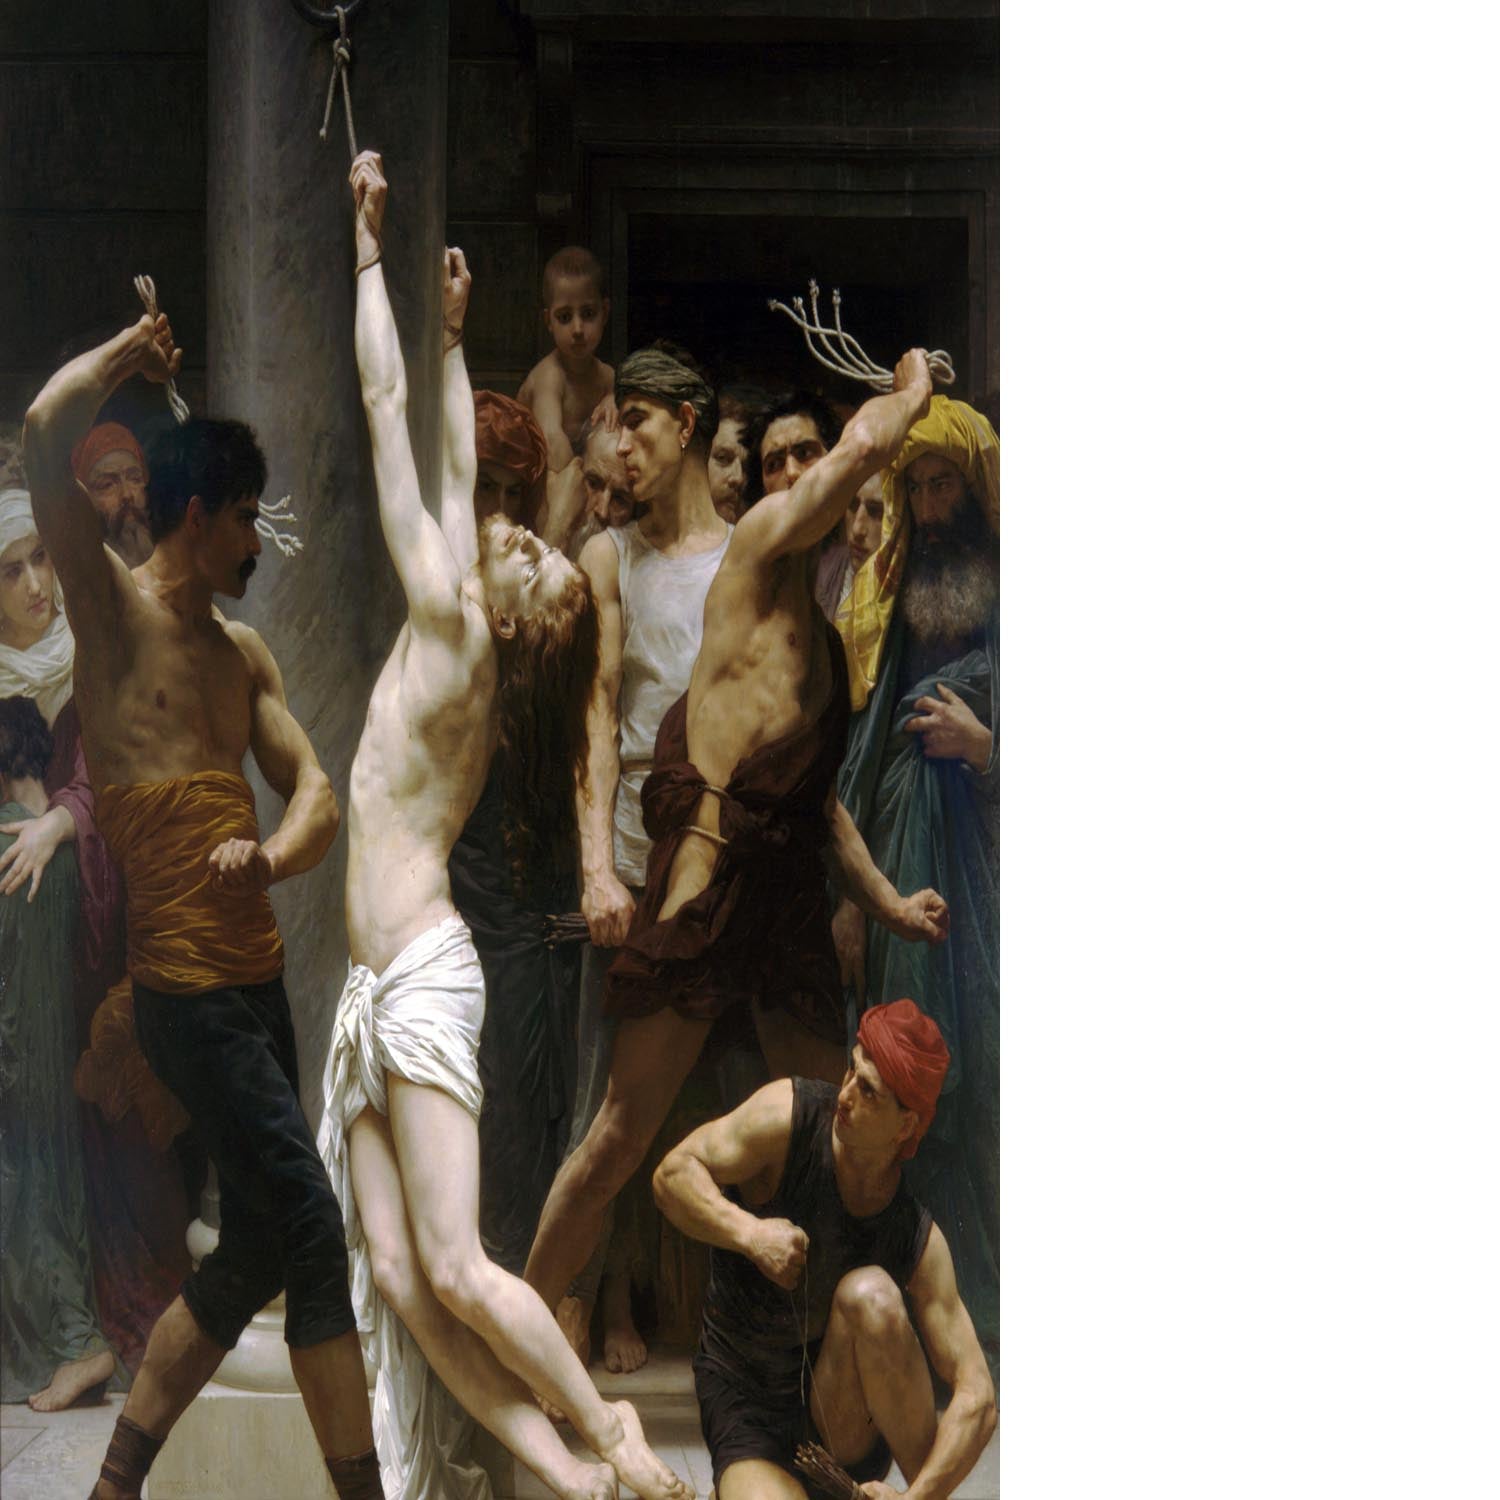 The Flagellation of Our Lord Jesus Christ By Bouguereau Floating Framed Canvas